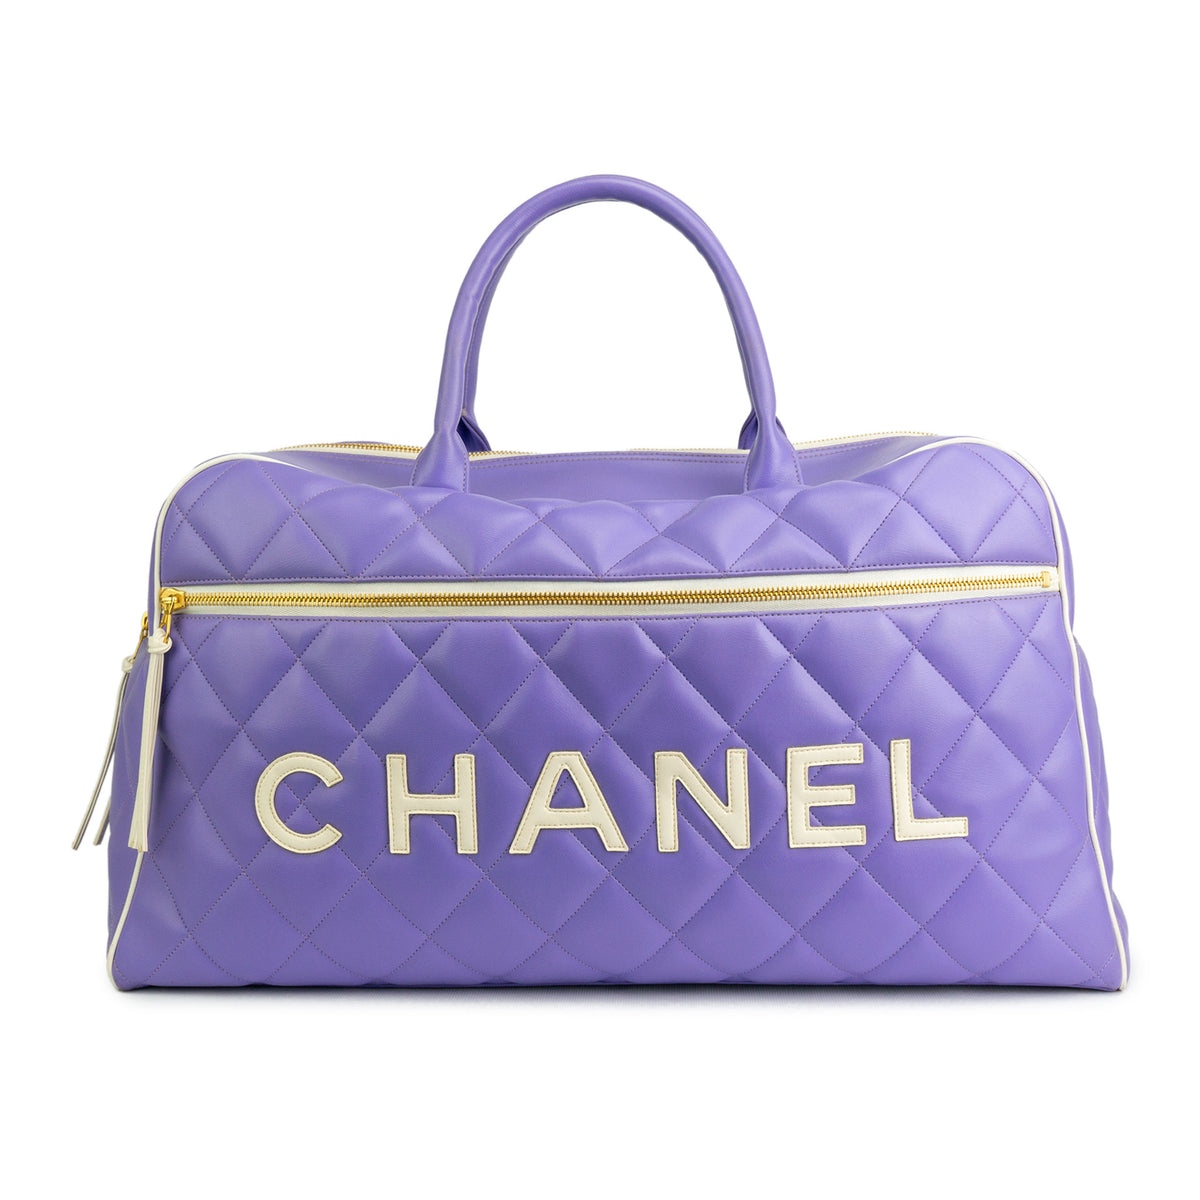 Get the best deals on CHANEL Purple Wallets for Women when you